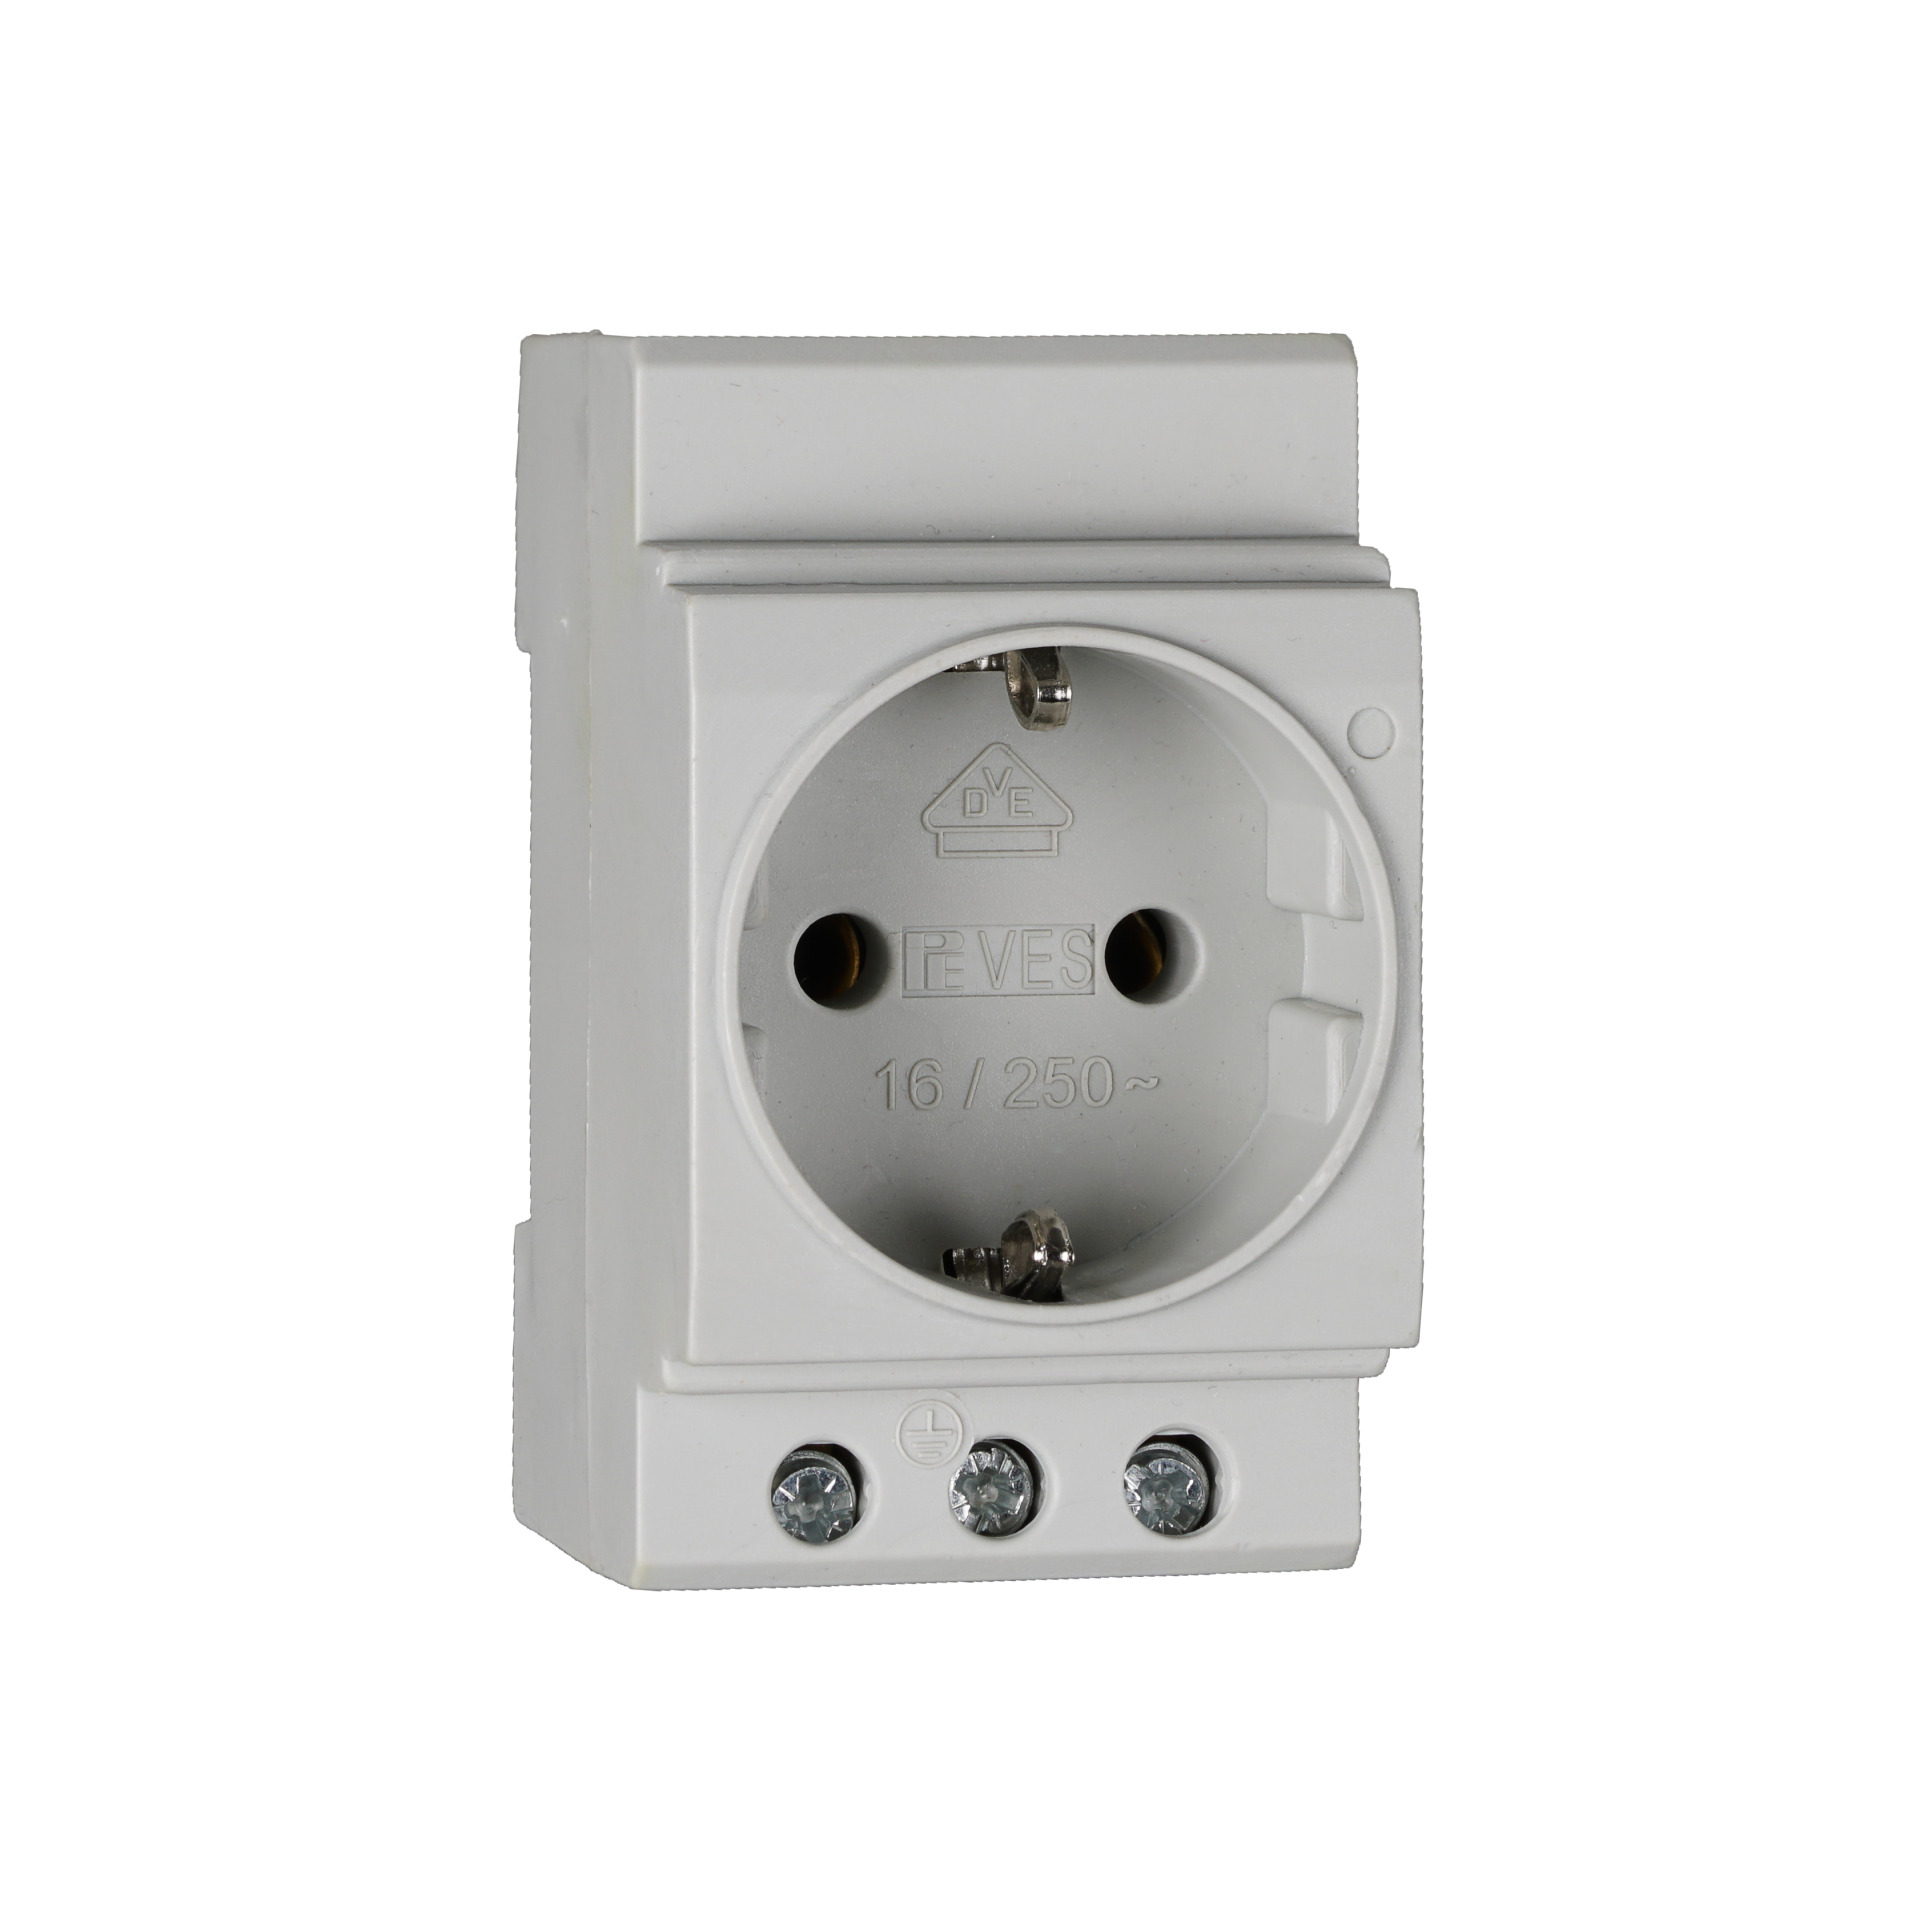 Outlet 1-Way for DIN-Rail, grey